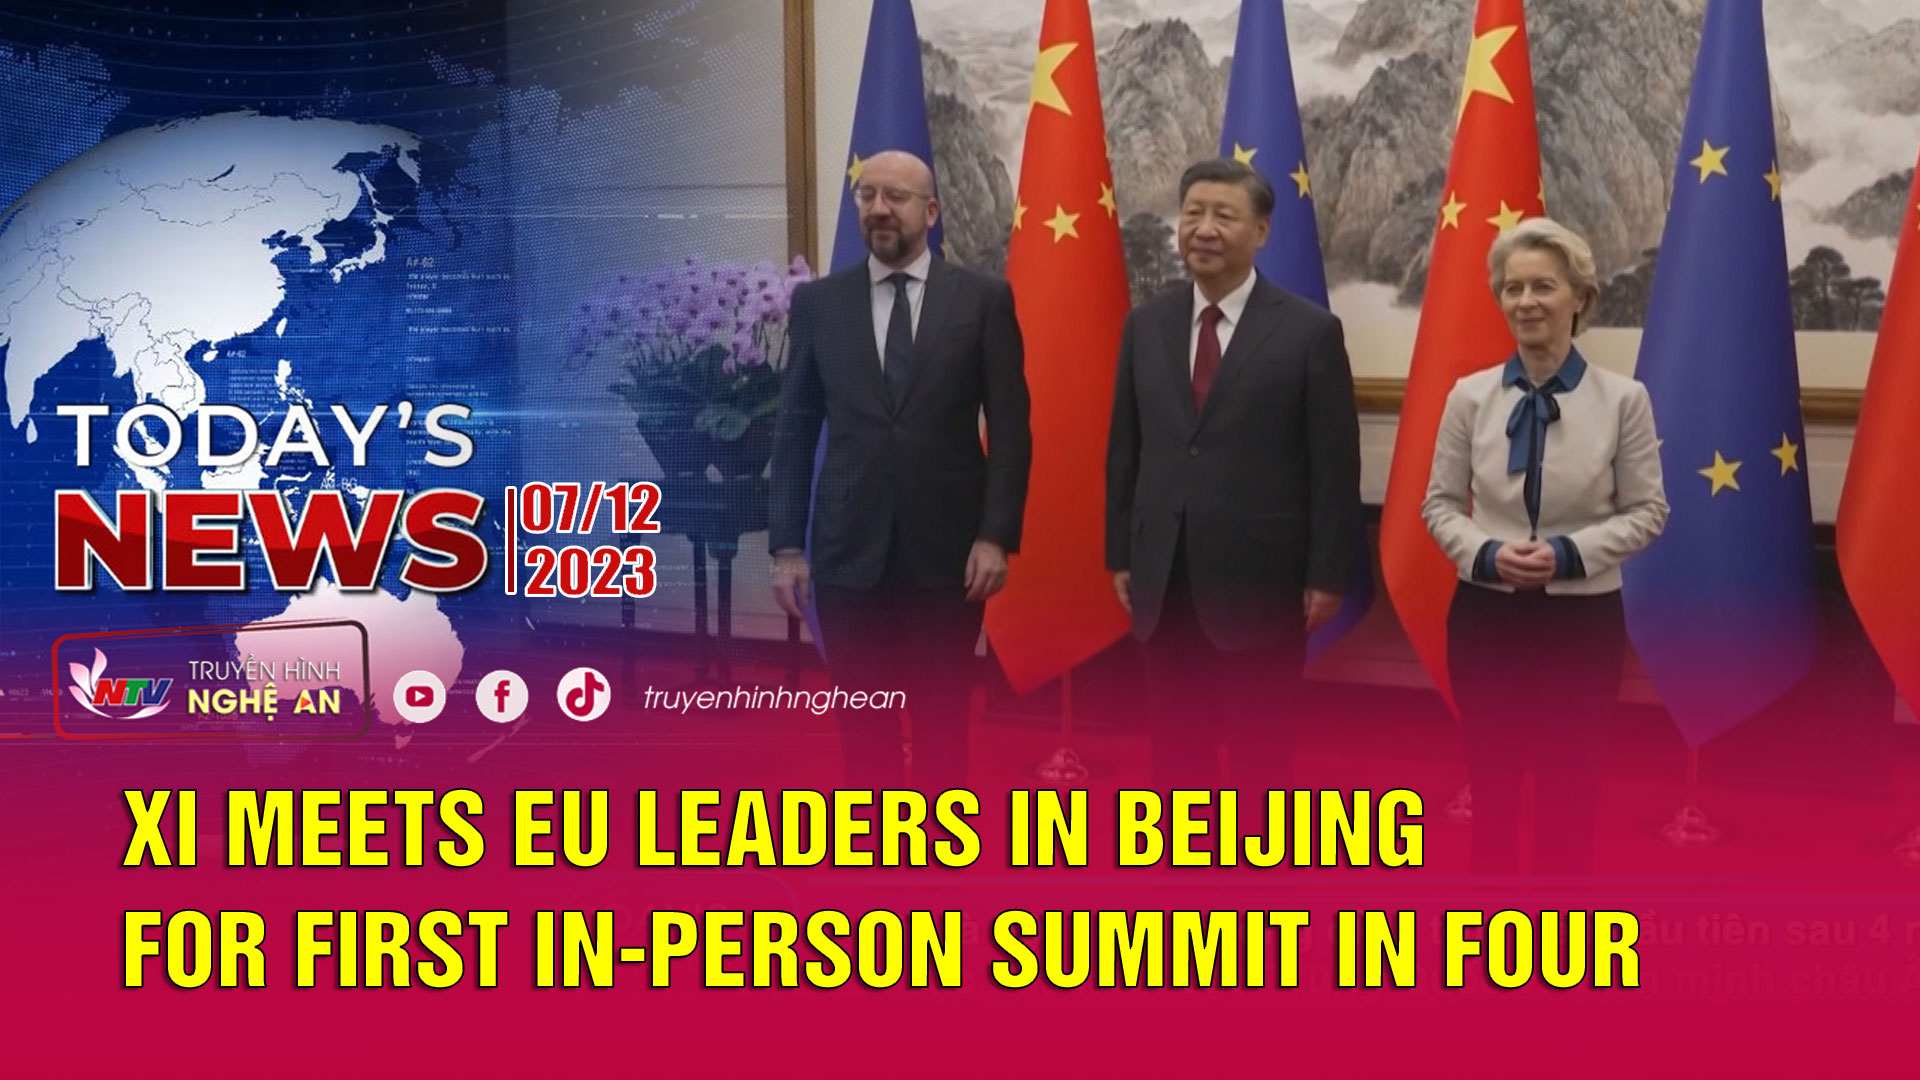 Today's News - 07/12/2023: Xi meets EU Leaders in Beijing for First In-Person Summit in Four Years